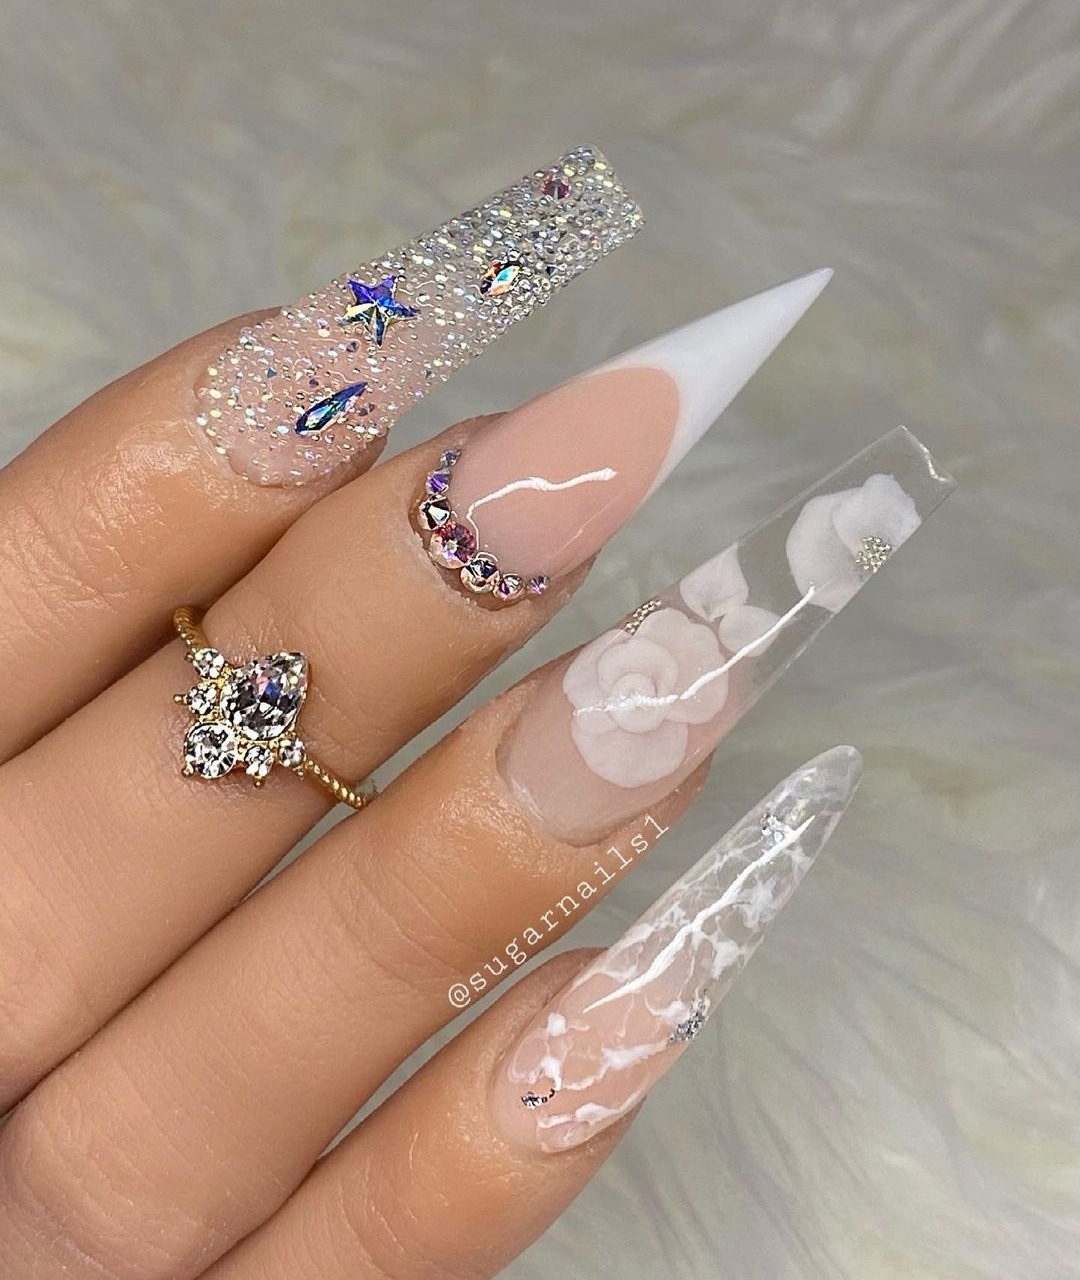 Fofosbeauty 24PCS Fake Press on Nails Coffin Long Fake Nails for Girls  Women, Coffin Pop Art Green with Stones - Walmart.com